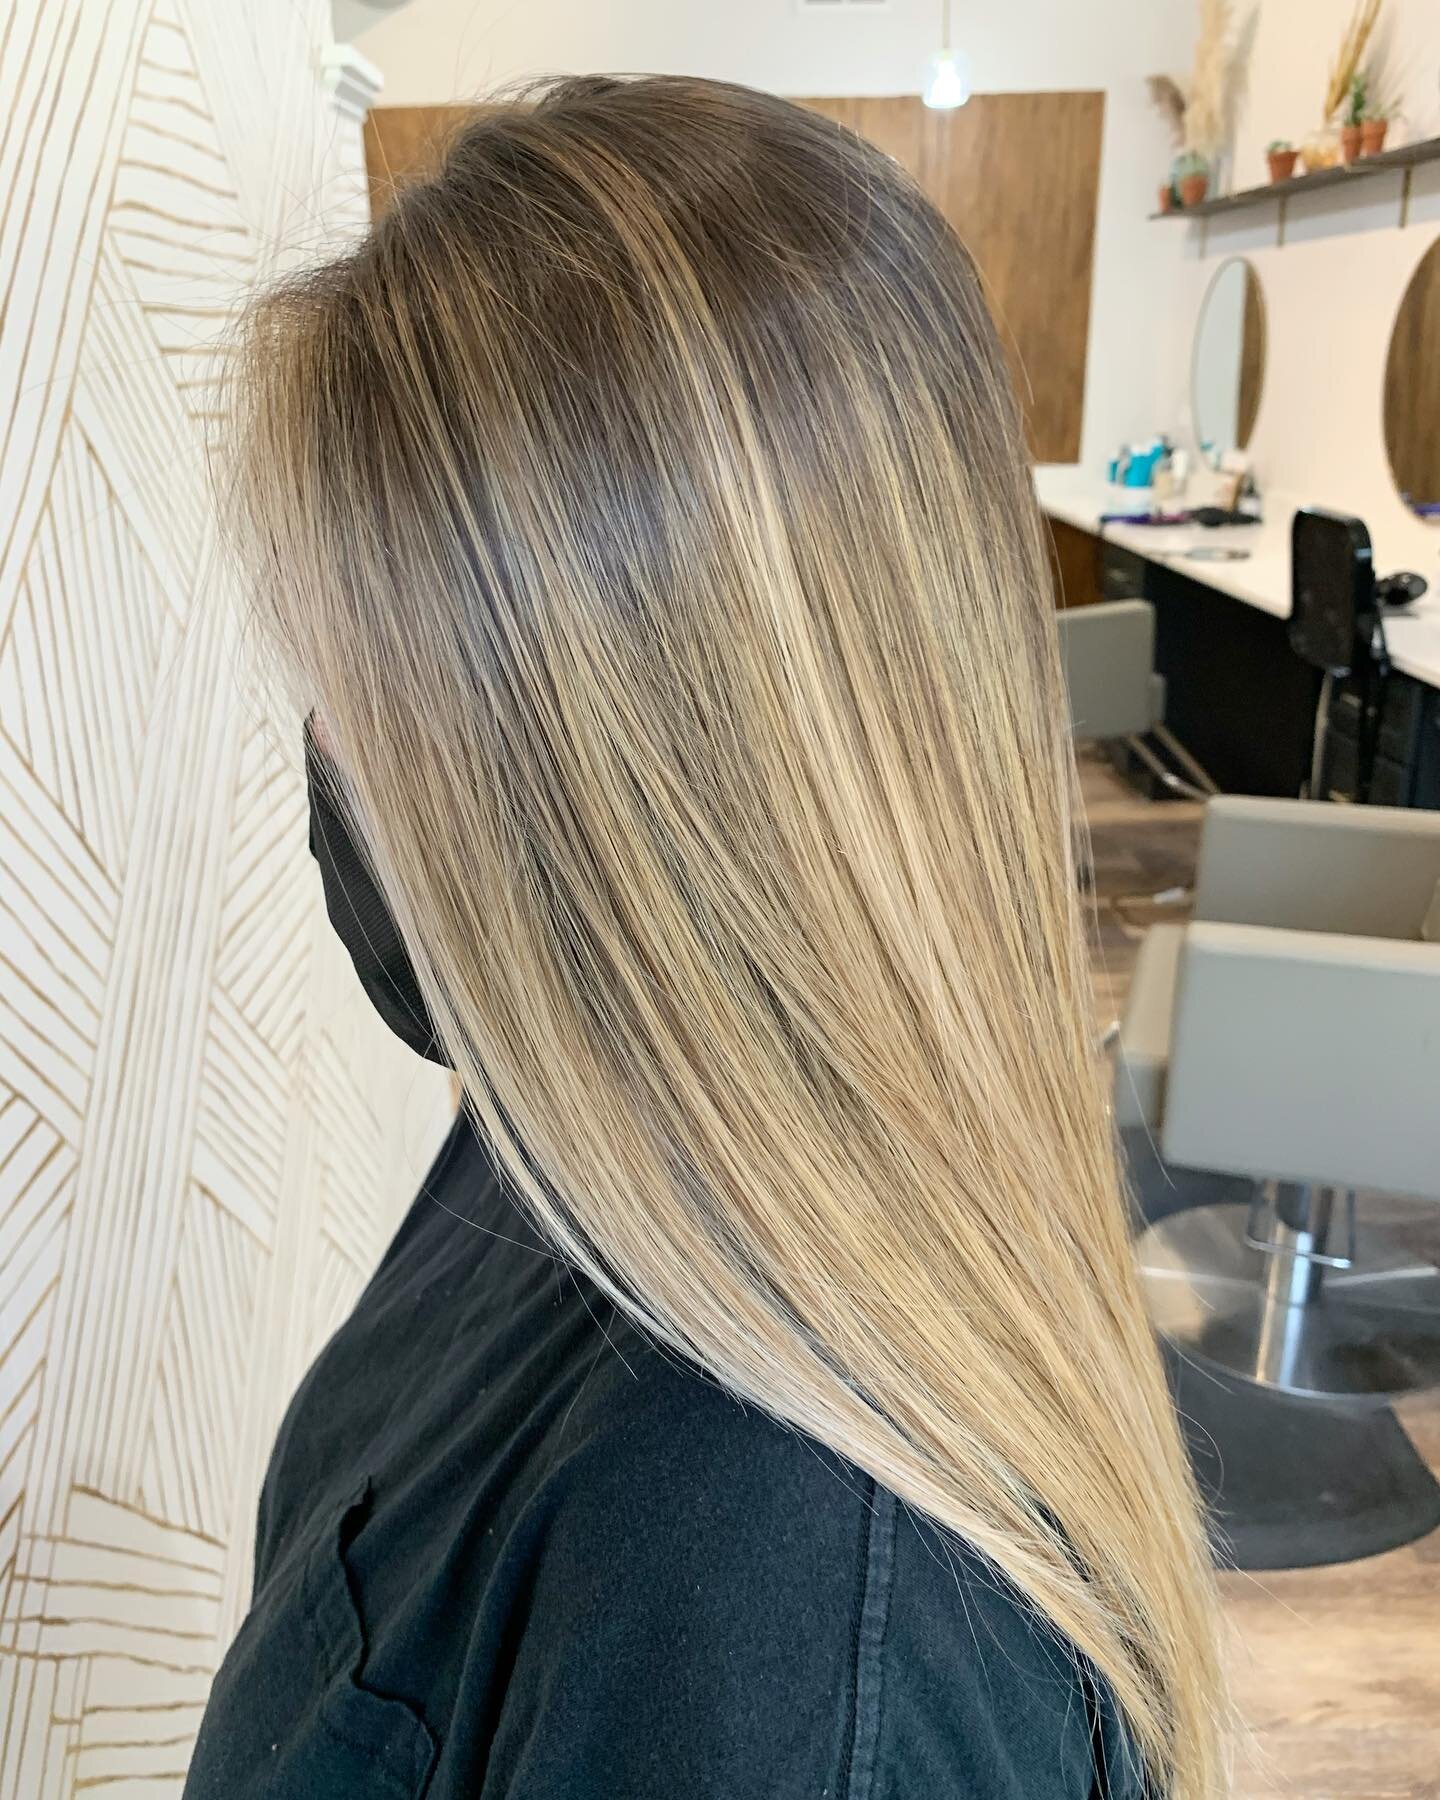 Loving this natural blended look! 🤤
.
Follow the link in my bio to book an appointment with me!
.
#wakeforesthairstylist #wakeforesthair #wakeforestnc #raleighhairstylist #raleighhair #raleigh #balayage #919hairstylist #919balayage #blondebalayage #